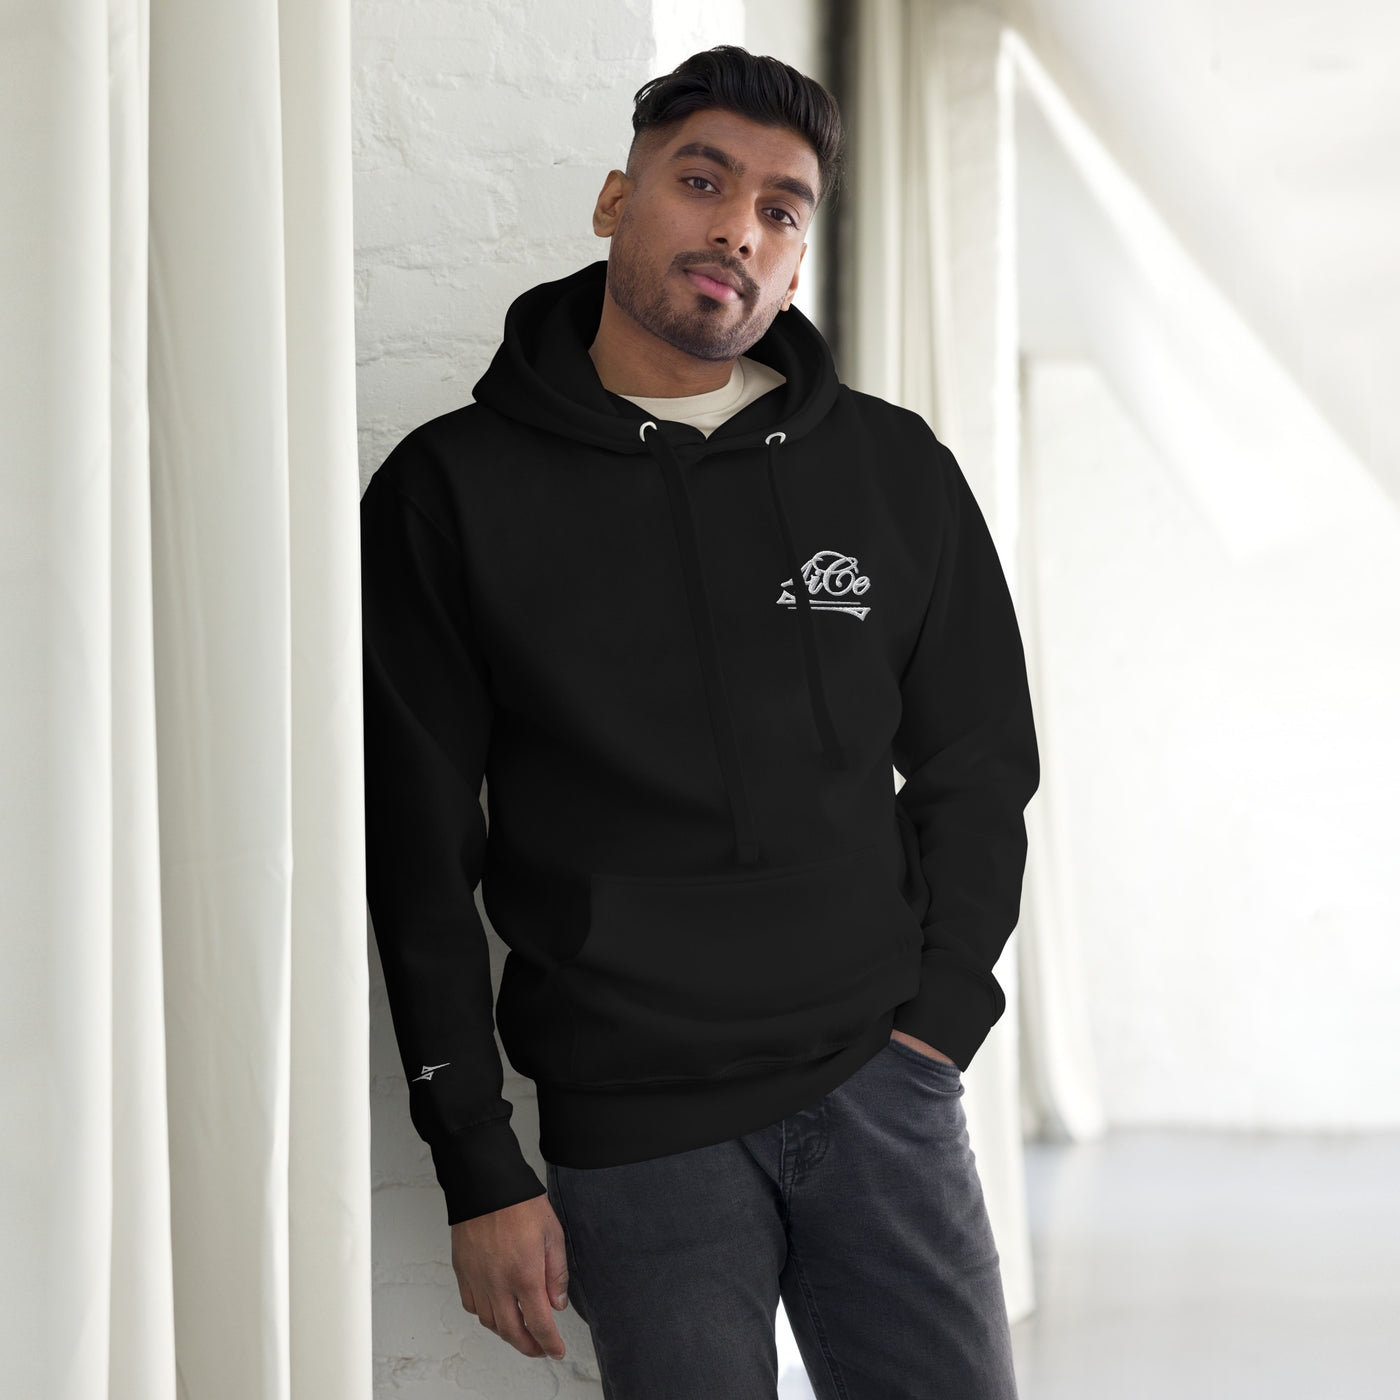 4iCe® Lil Elite Boxing embroidered hoodie, black